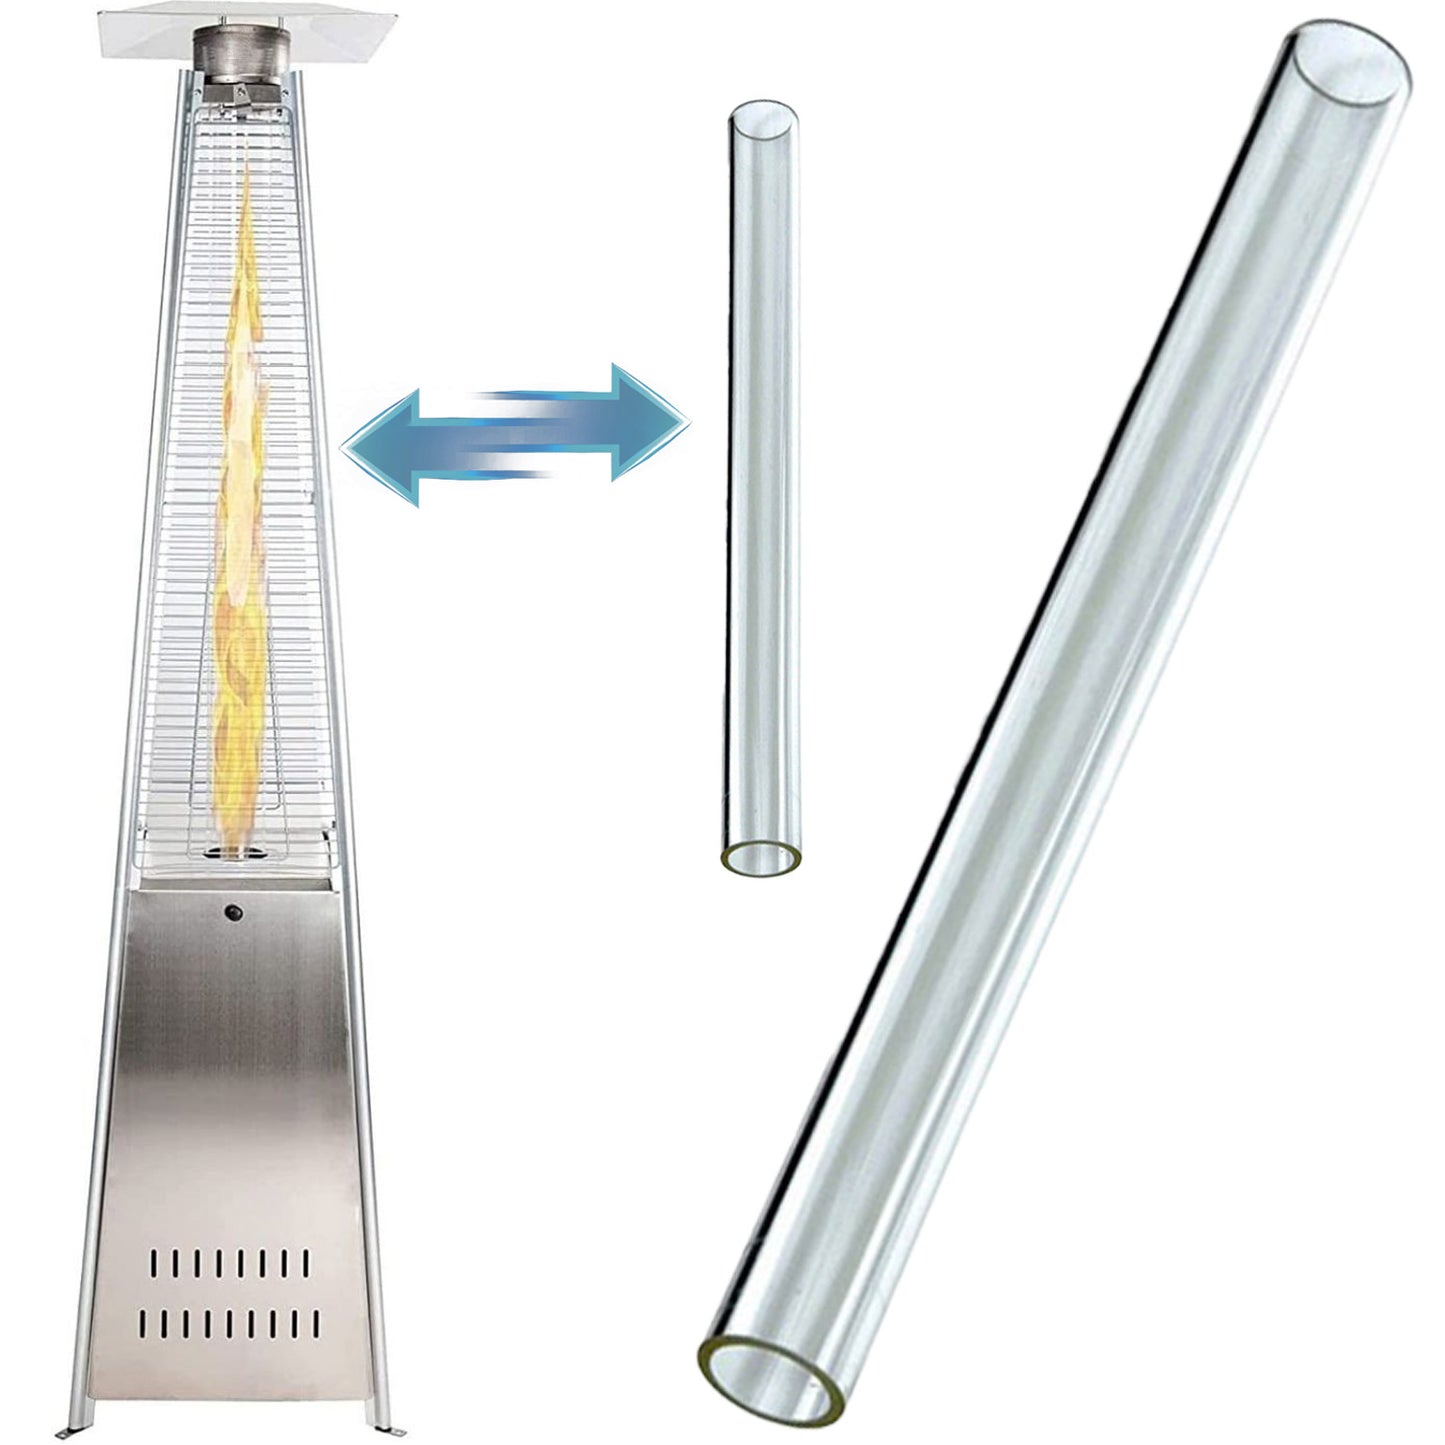 Spare Replacement Glass Tube Only 125 x 10cm for Standing Gas Patio Heater Pyramid Flame 13kW